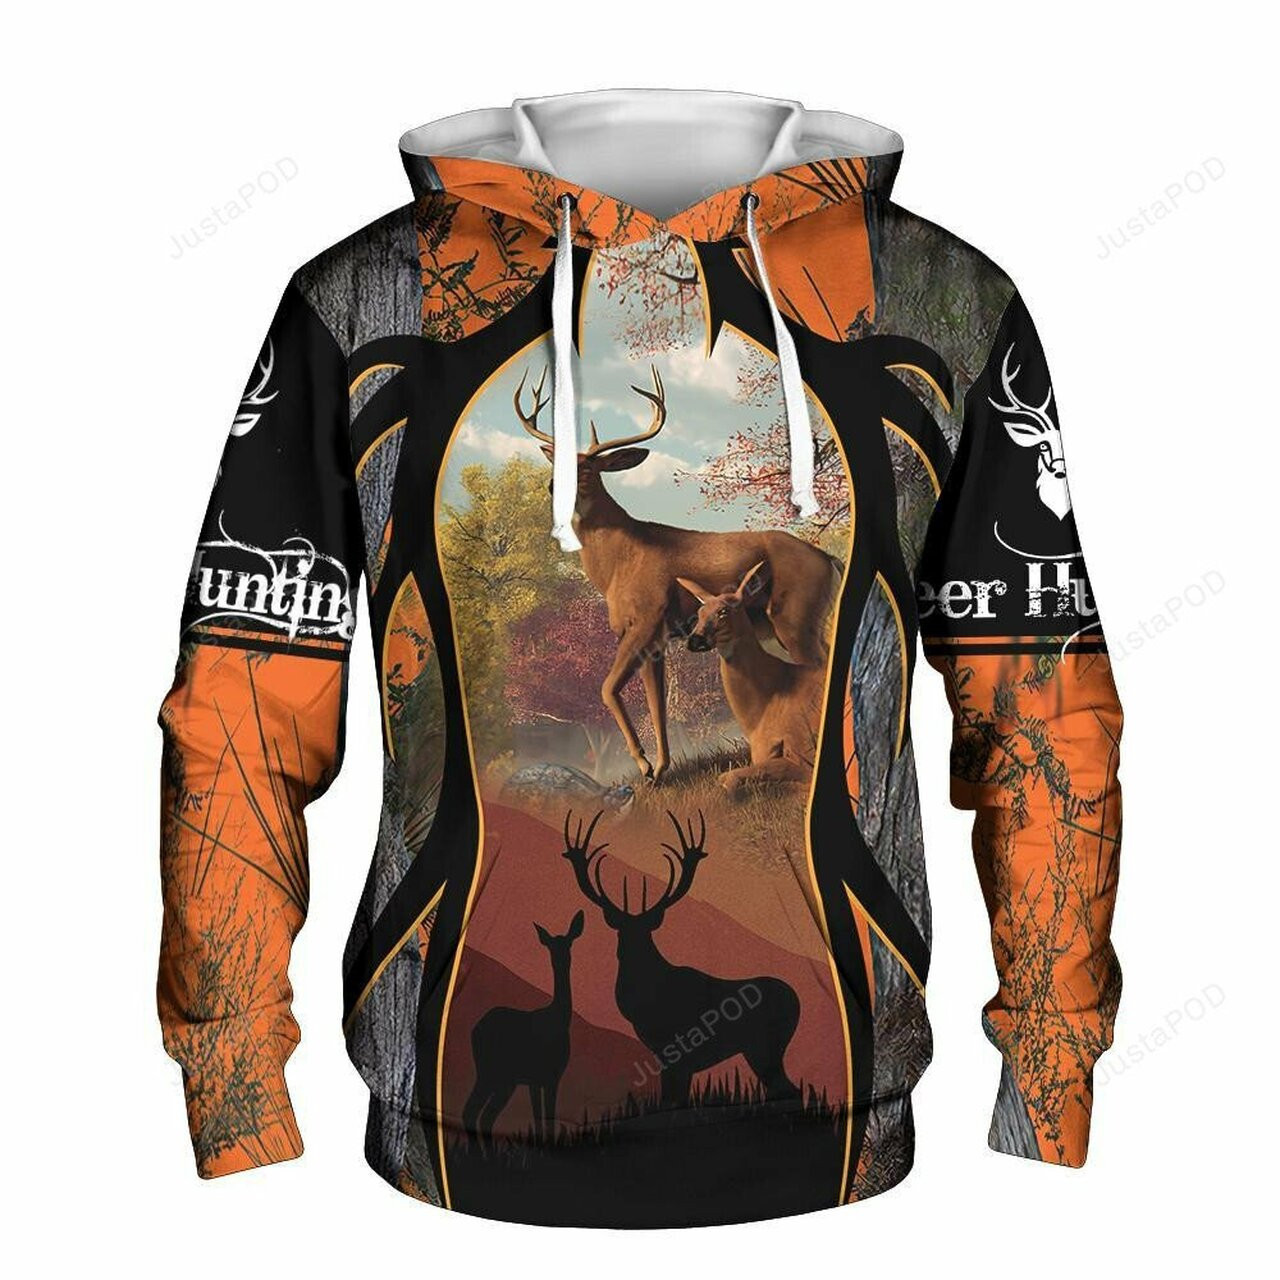 Hunting 3d All Over Print Hoodie